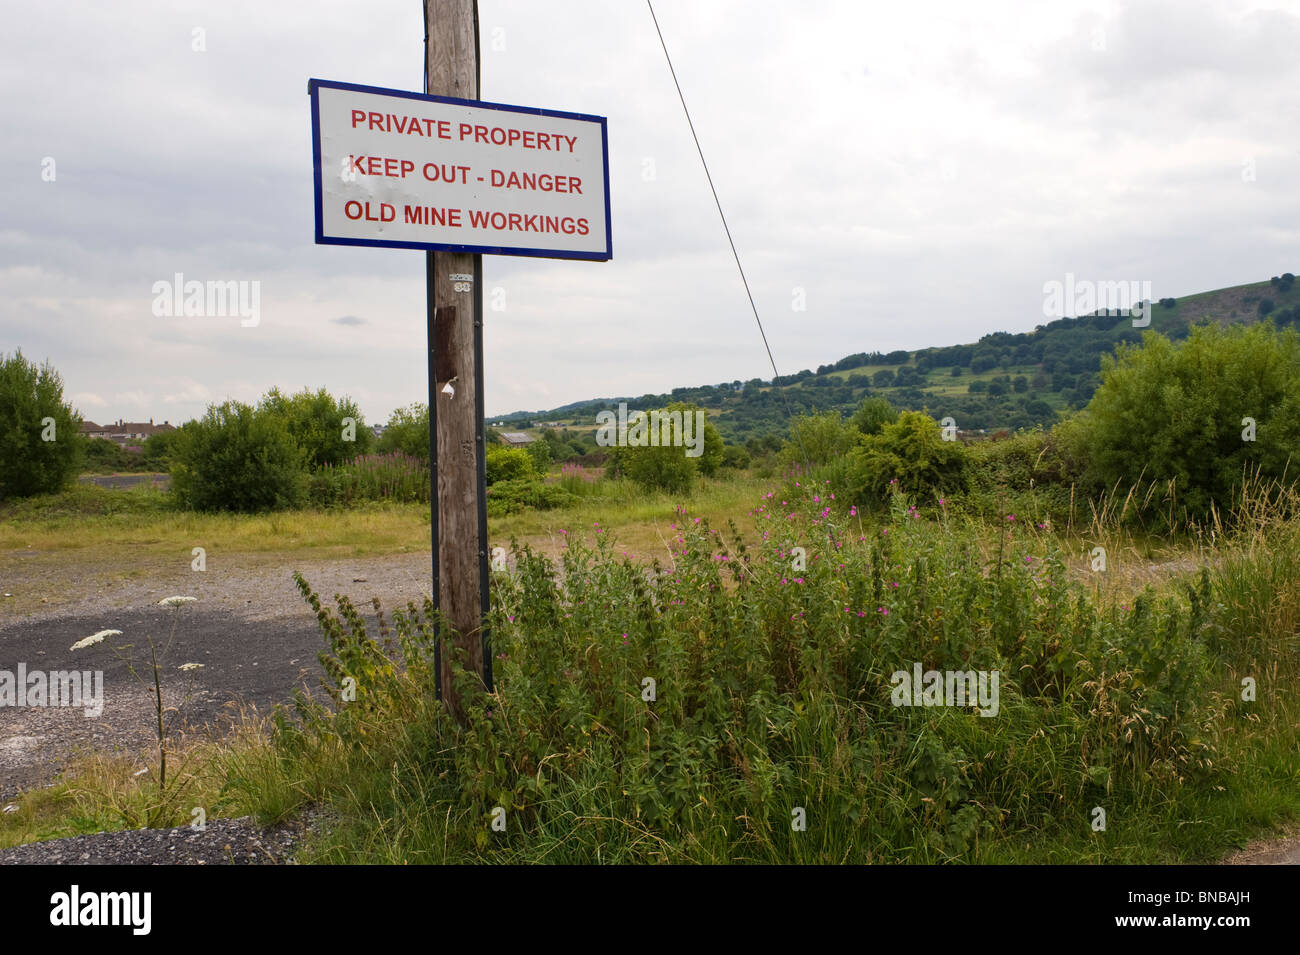 PRIVATE PROPERTY KEEP OUT DANGER OLD MINE WORKINGS sign on former colliery site at The British Torfaen South Wales UK Stock Photo